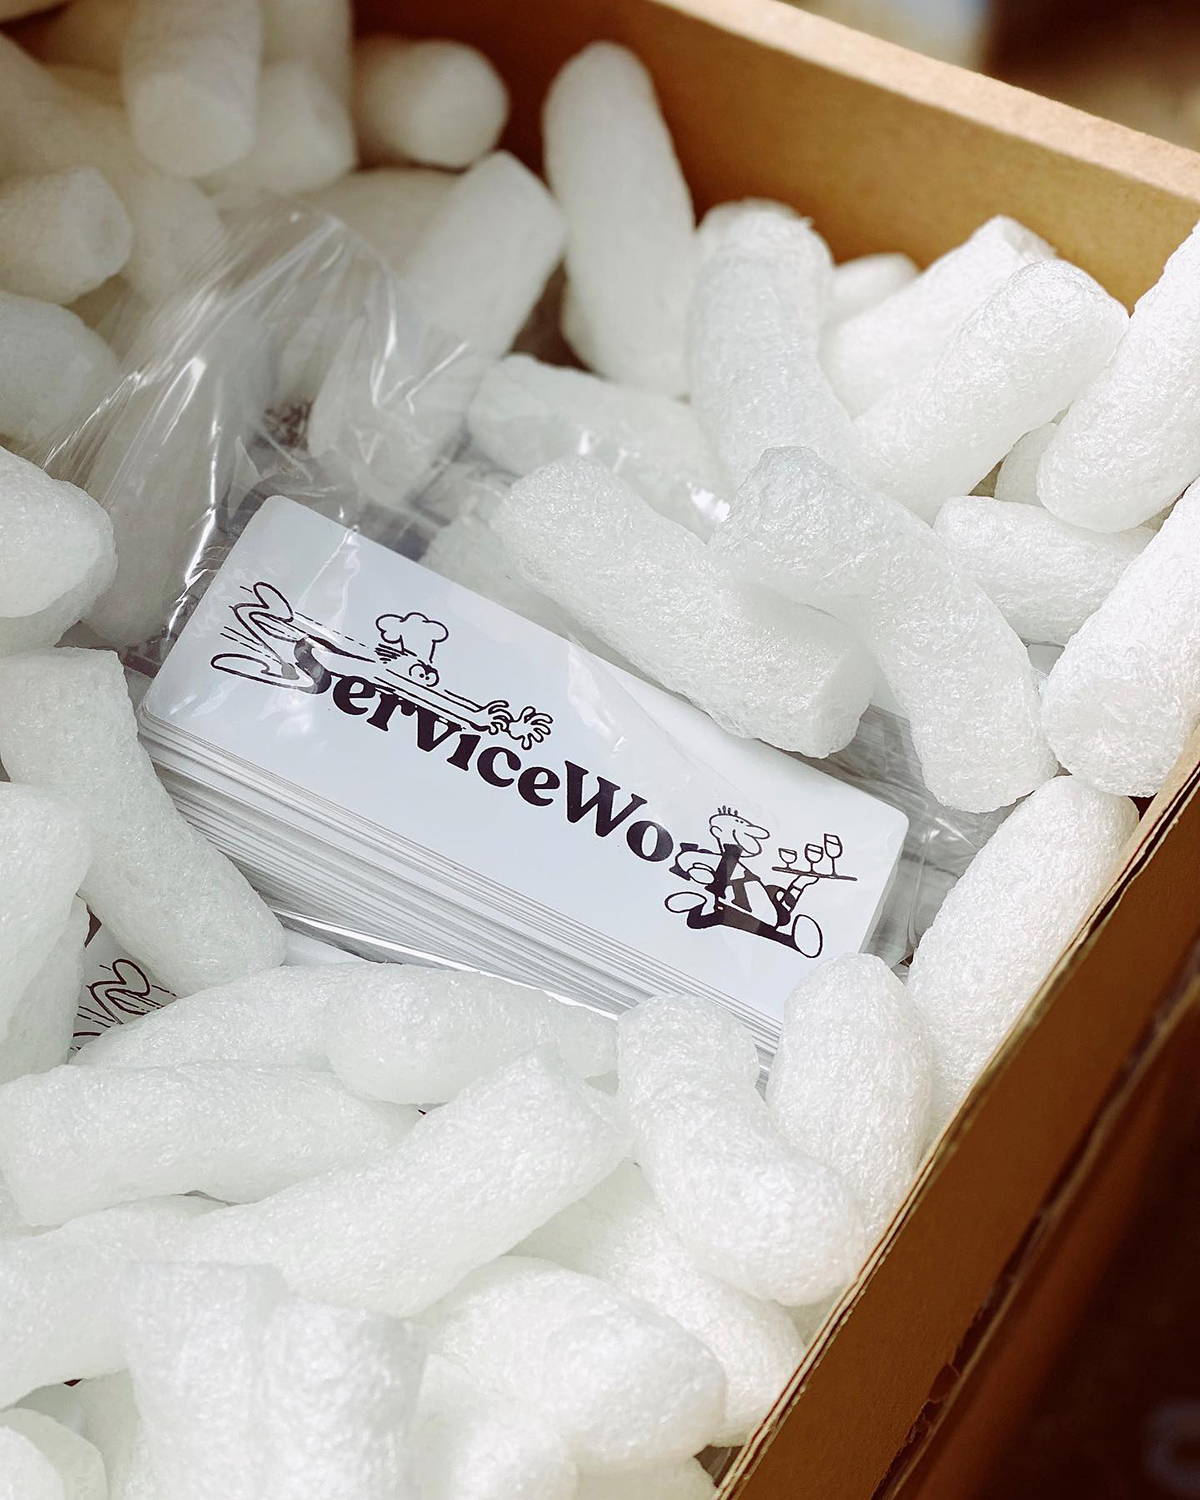 A styled image of Service Works delivery packaging.